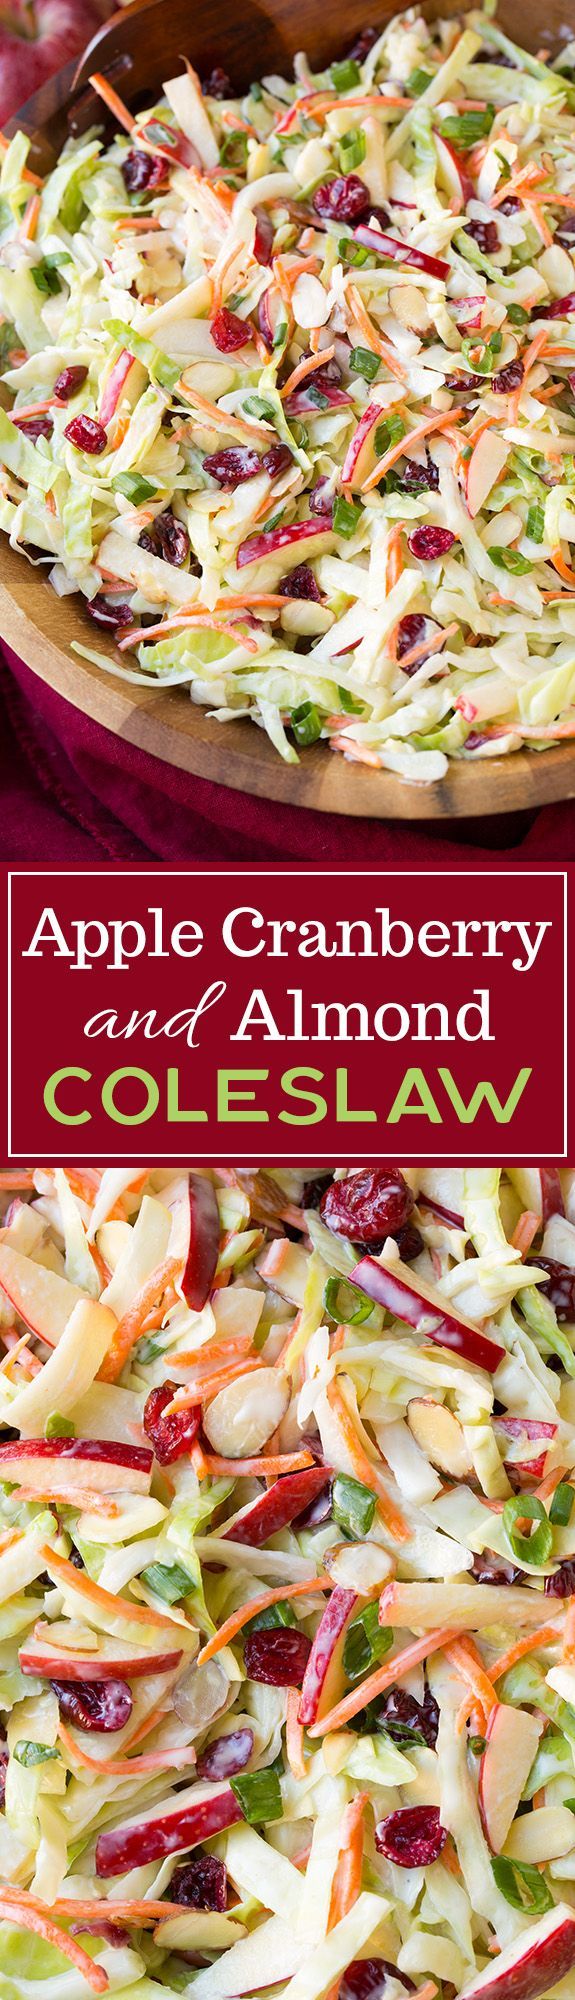 Apple Cranberry Almond Coleslaw – love that it uses mostly Greek yogurt instead of mayo! Easy, healthy, delicious!